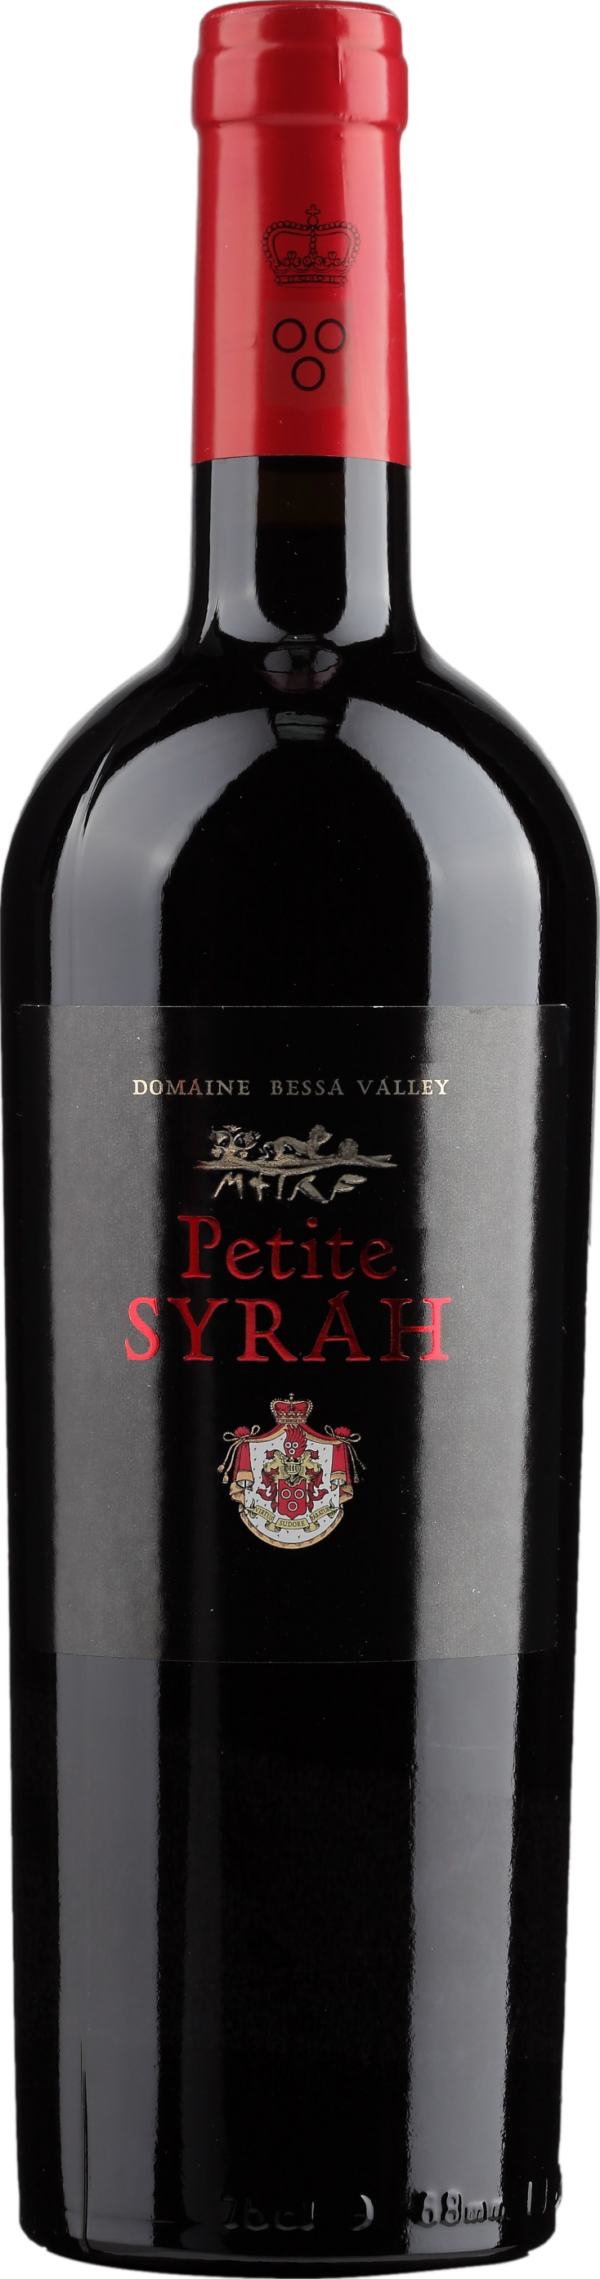 Product image of Bessa Valley Petite Syrah 2019 from 8wines